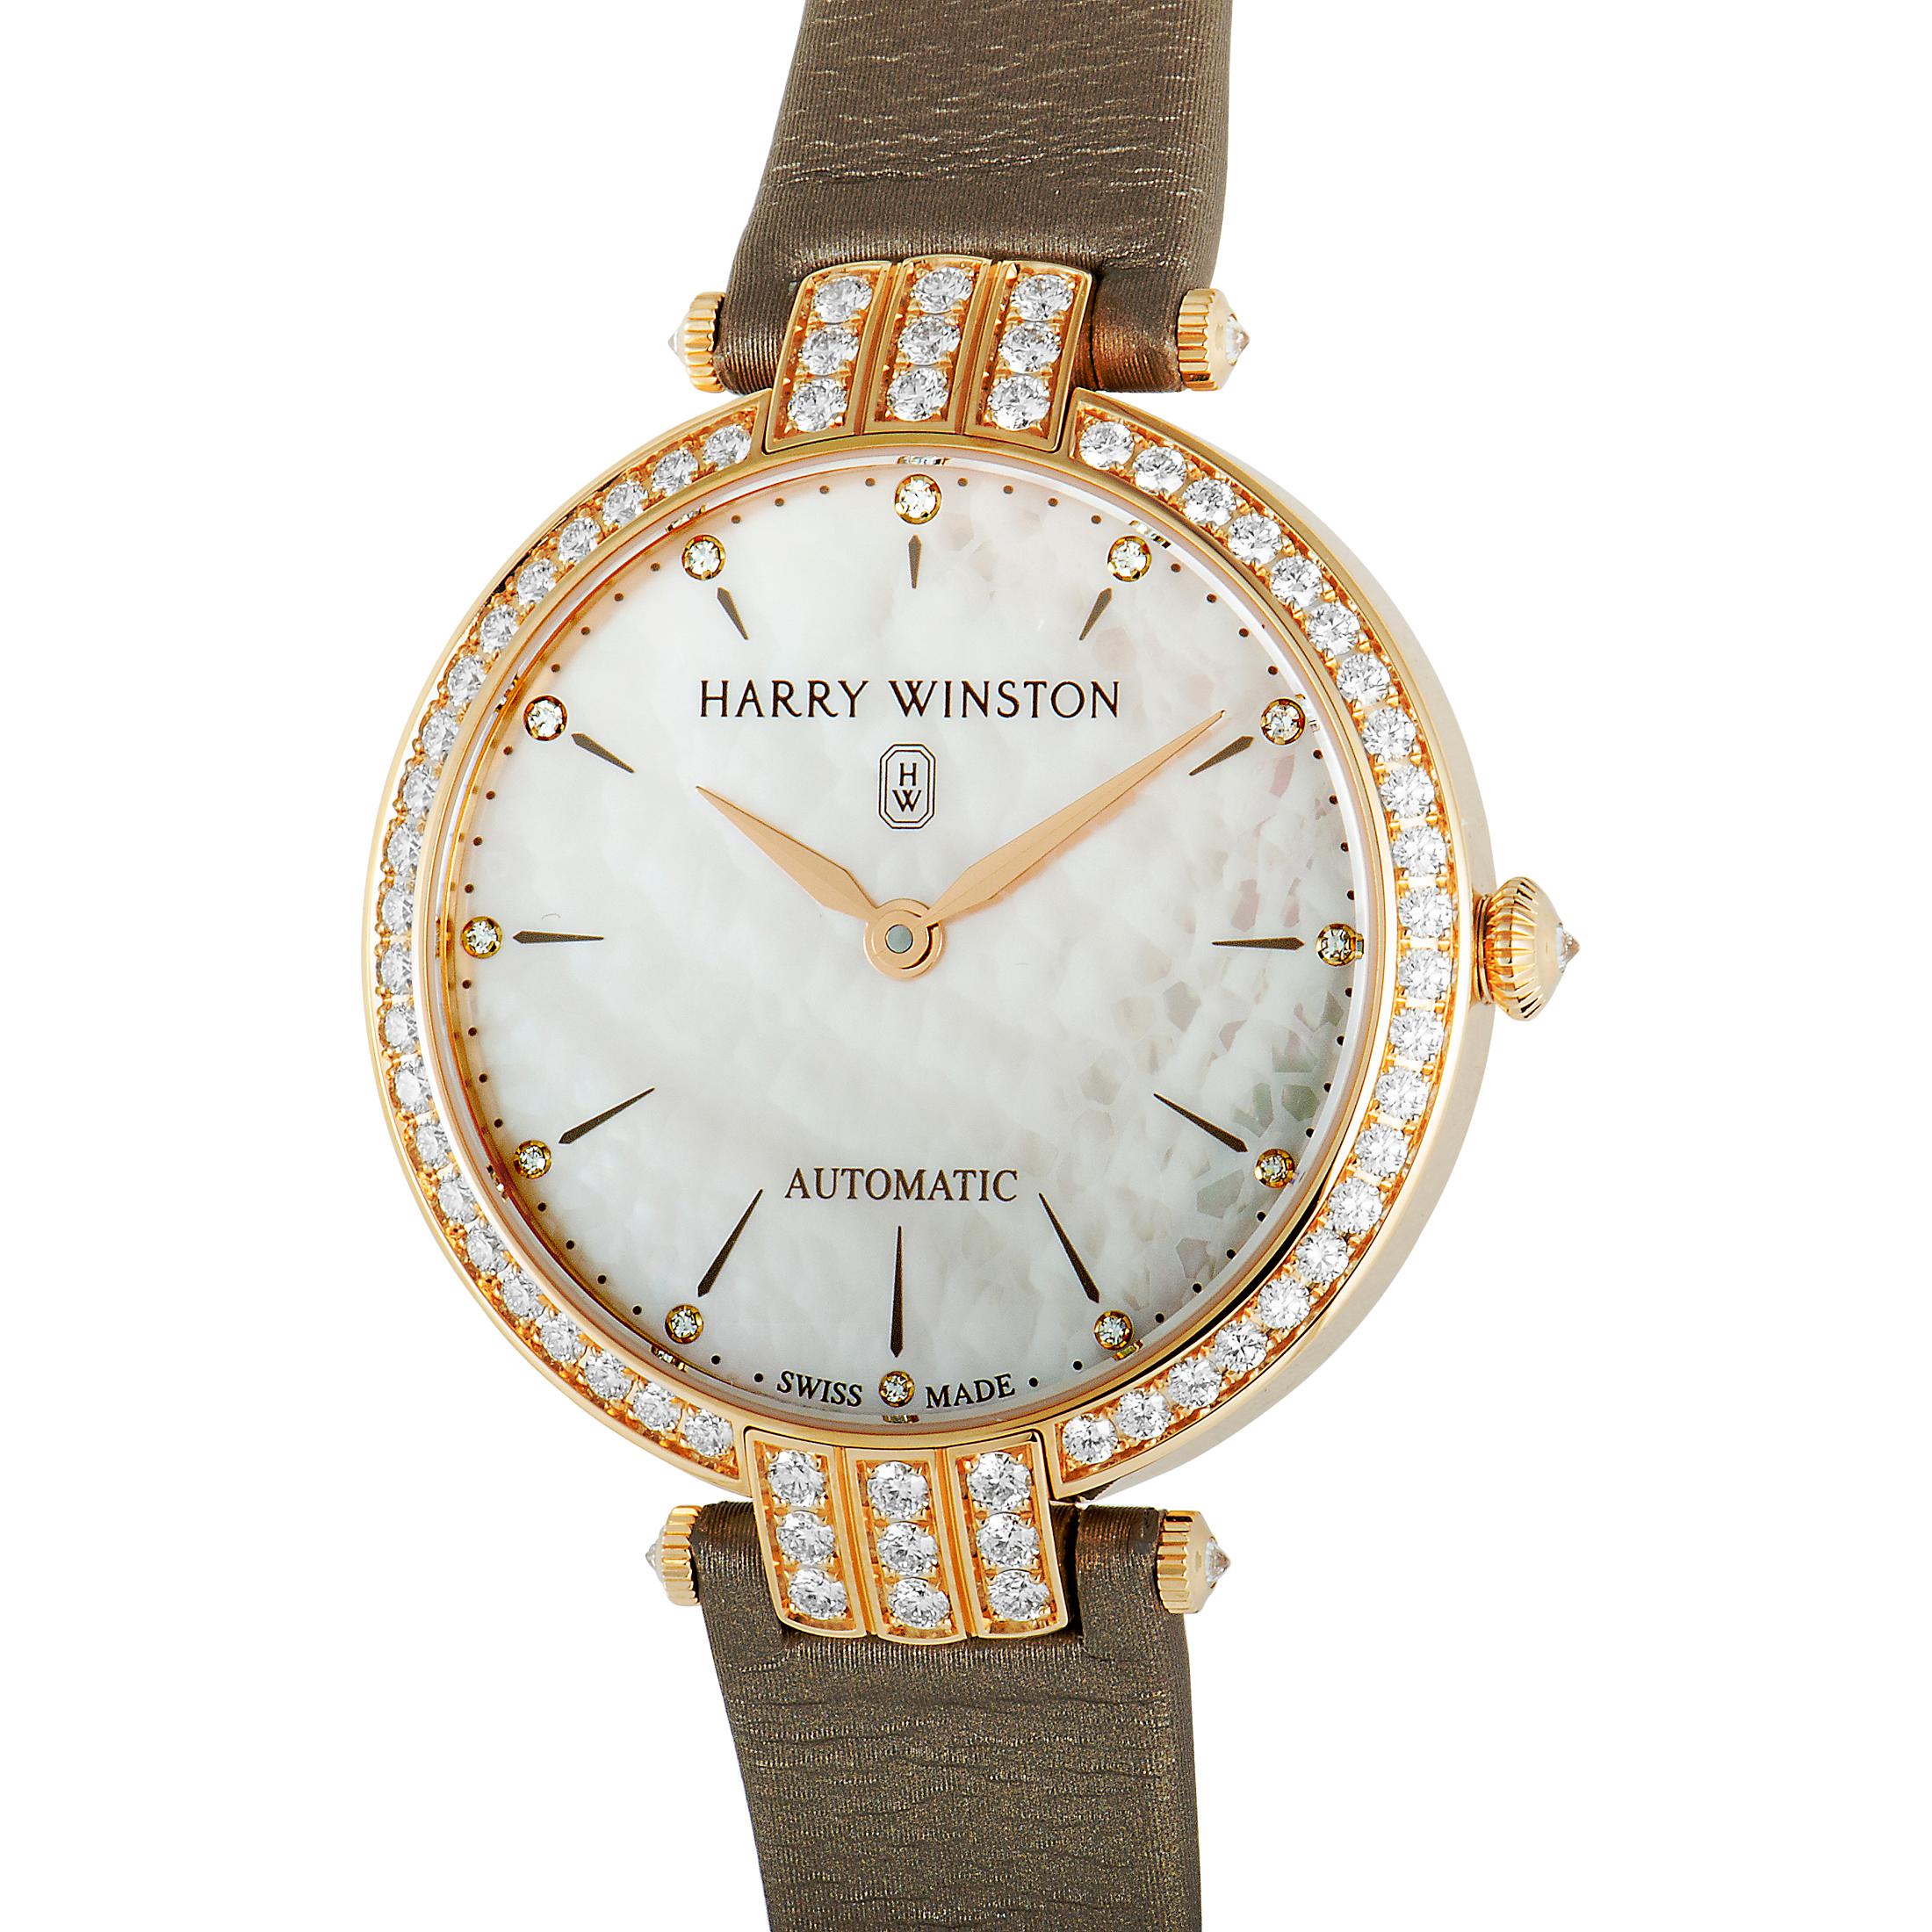 The Harry Winston Premier Ladies 36 mm Automatic, reference number PRNAHM36RR001, is a member of the exquisite “The Premier” collection.

The watch is presented with a diamond-set 18K rose gold case that boasts see-through back. The case measures 36